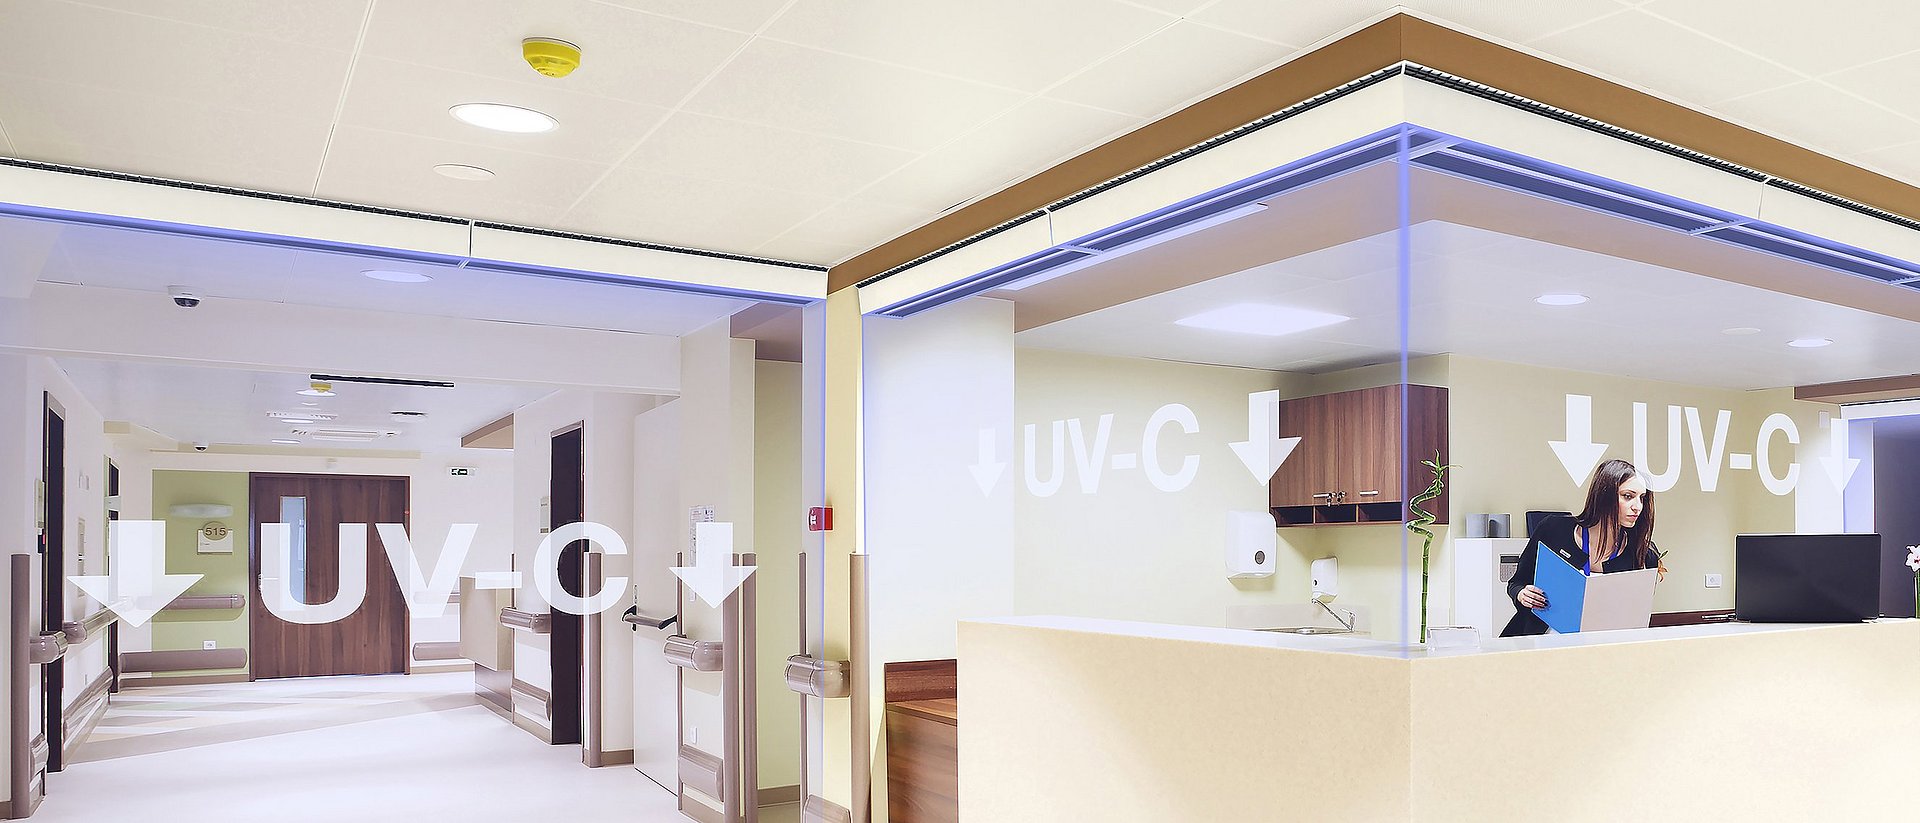 UV-C light extricates aerosols from pathogens such as the SARS-CoV-2 virus. This creates an invisible virus protection wall that protects the people behind it without restricting people's freedom of movement. An automatic shut-off device protects people passing through from UV radiation.